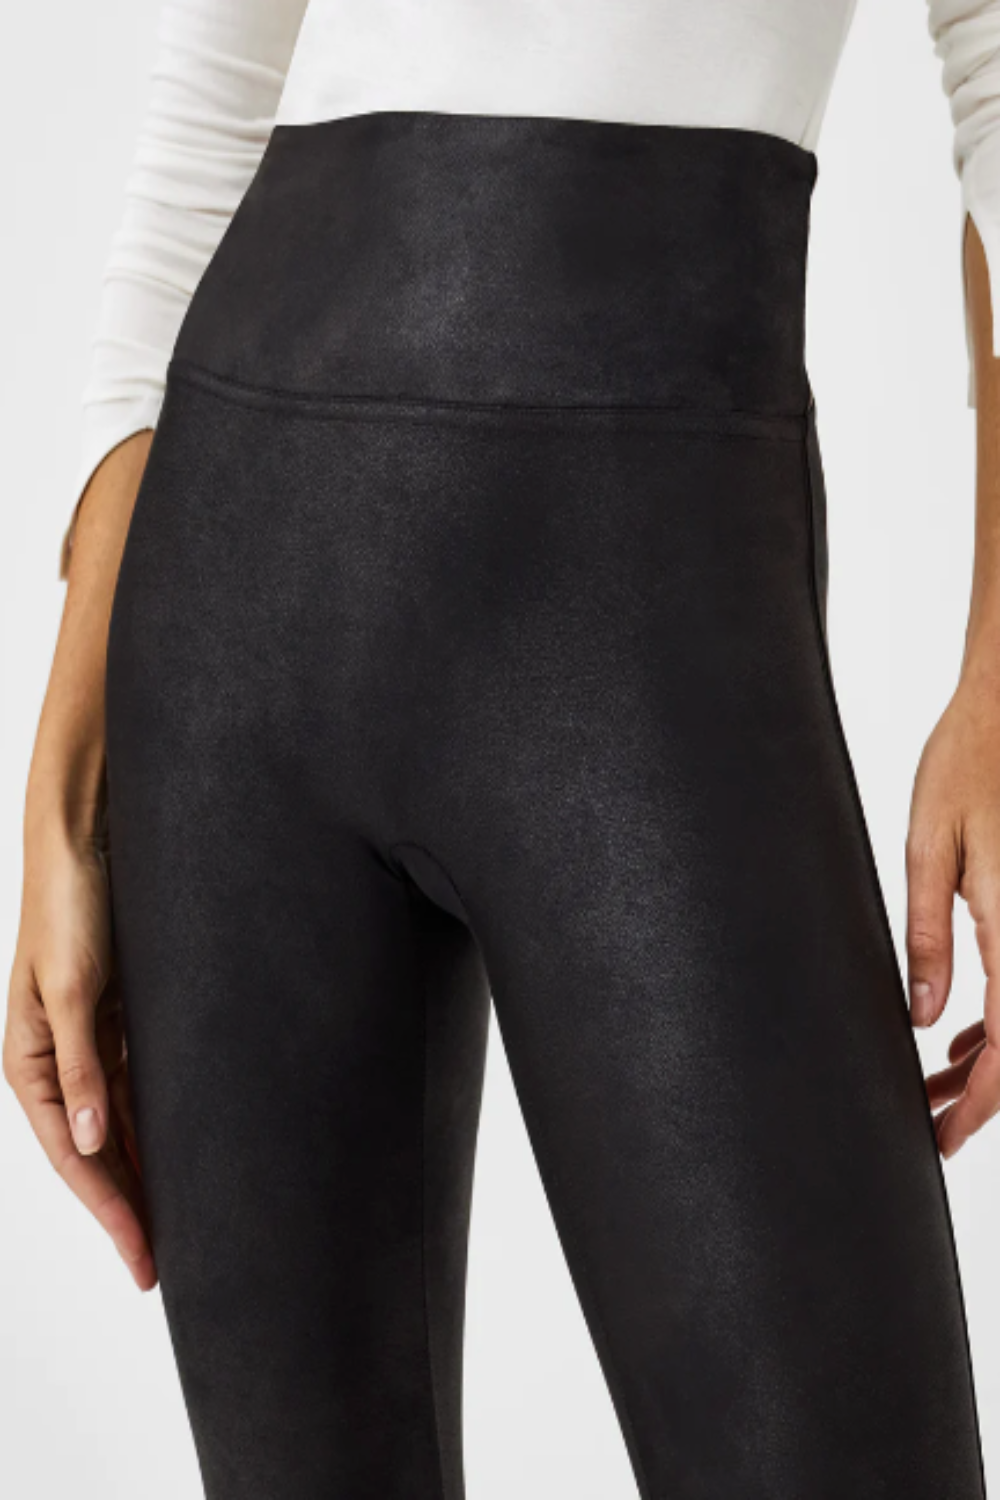 Leather Look Fleece Lined Leggings Depot  International Society of  Precision Agriculture